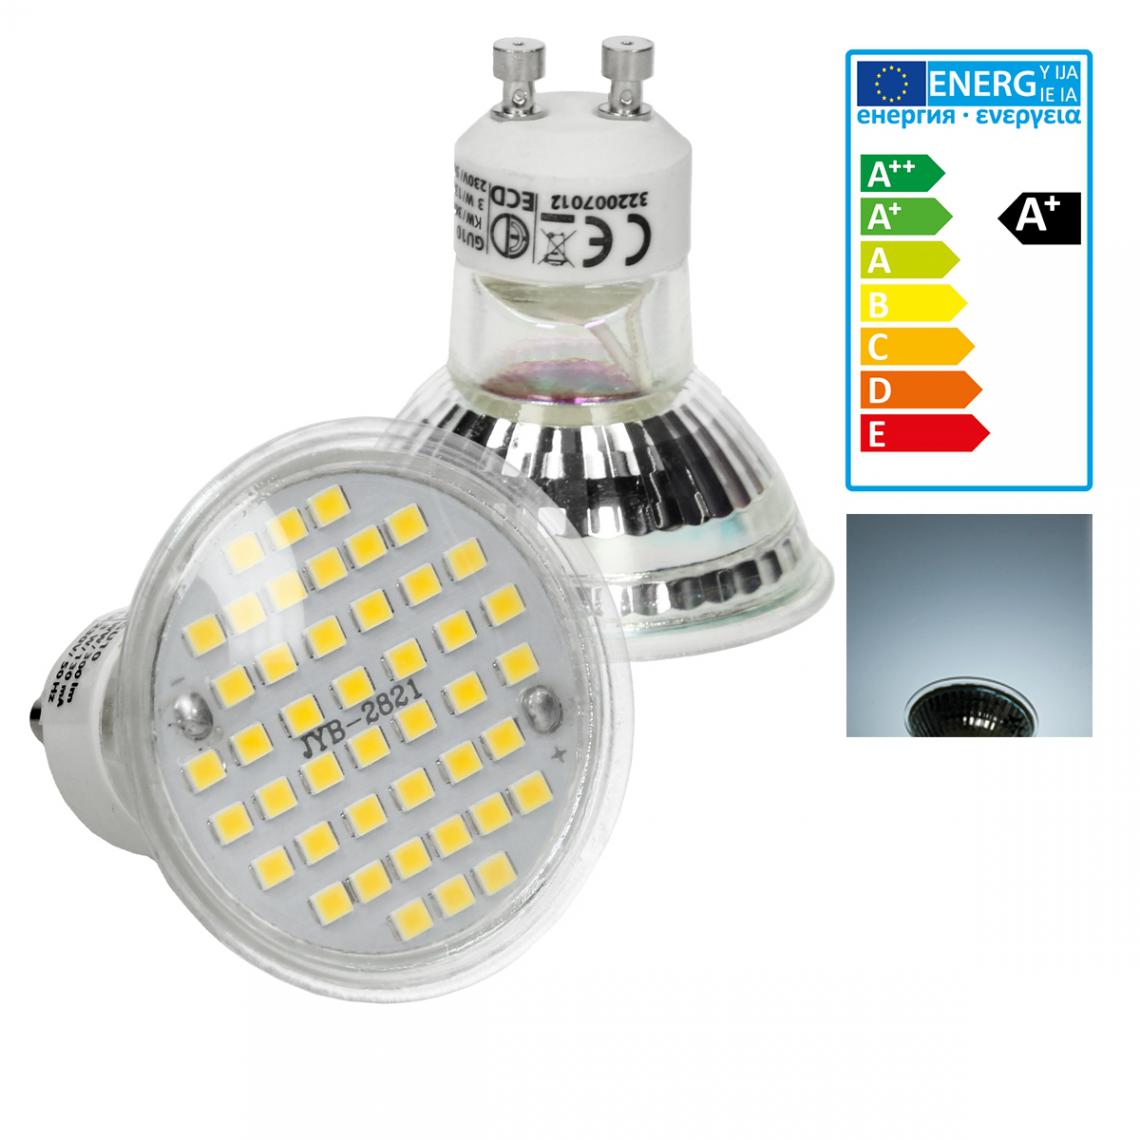 Ecd Germany - Lampe LED GU10 44SMD 3W verre blanc froid 6000K - Ampoules LED